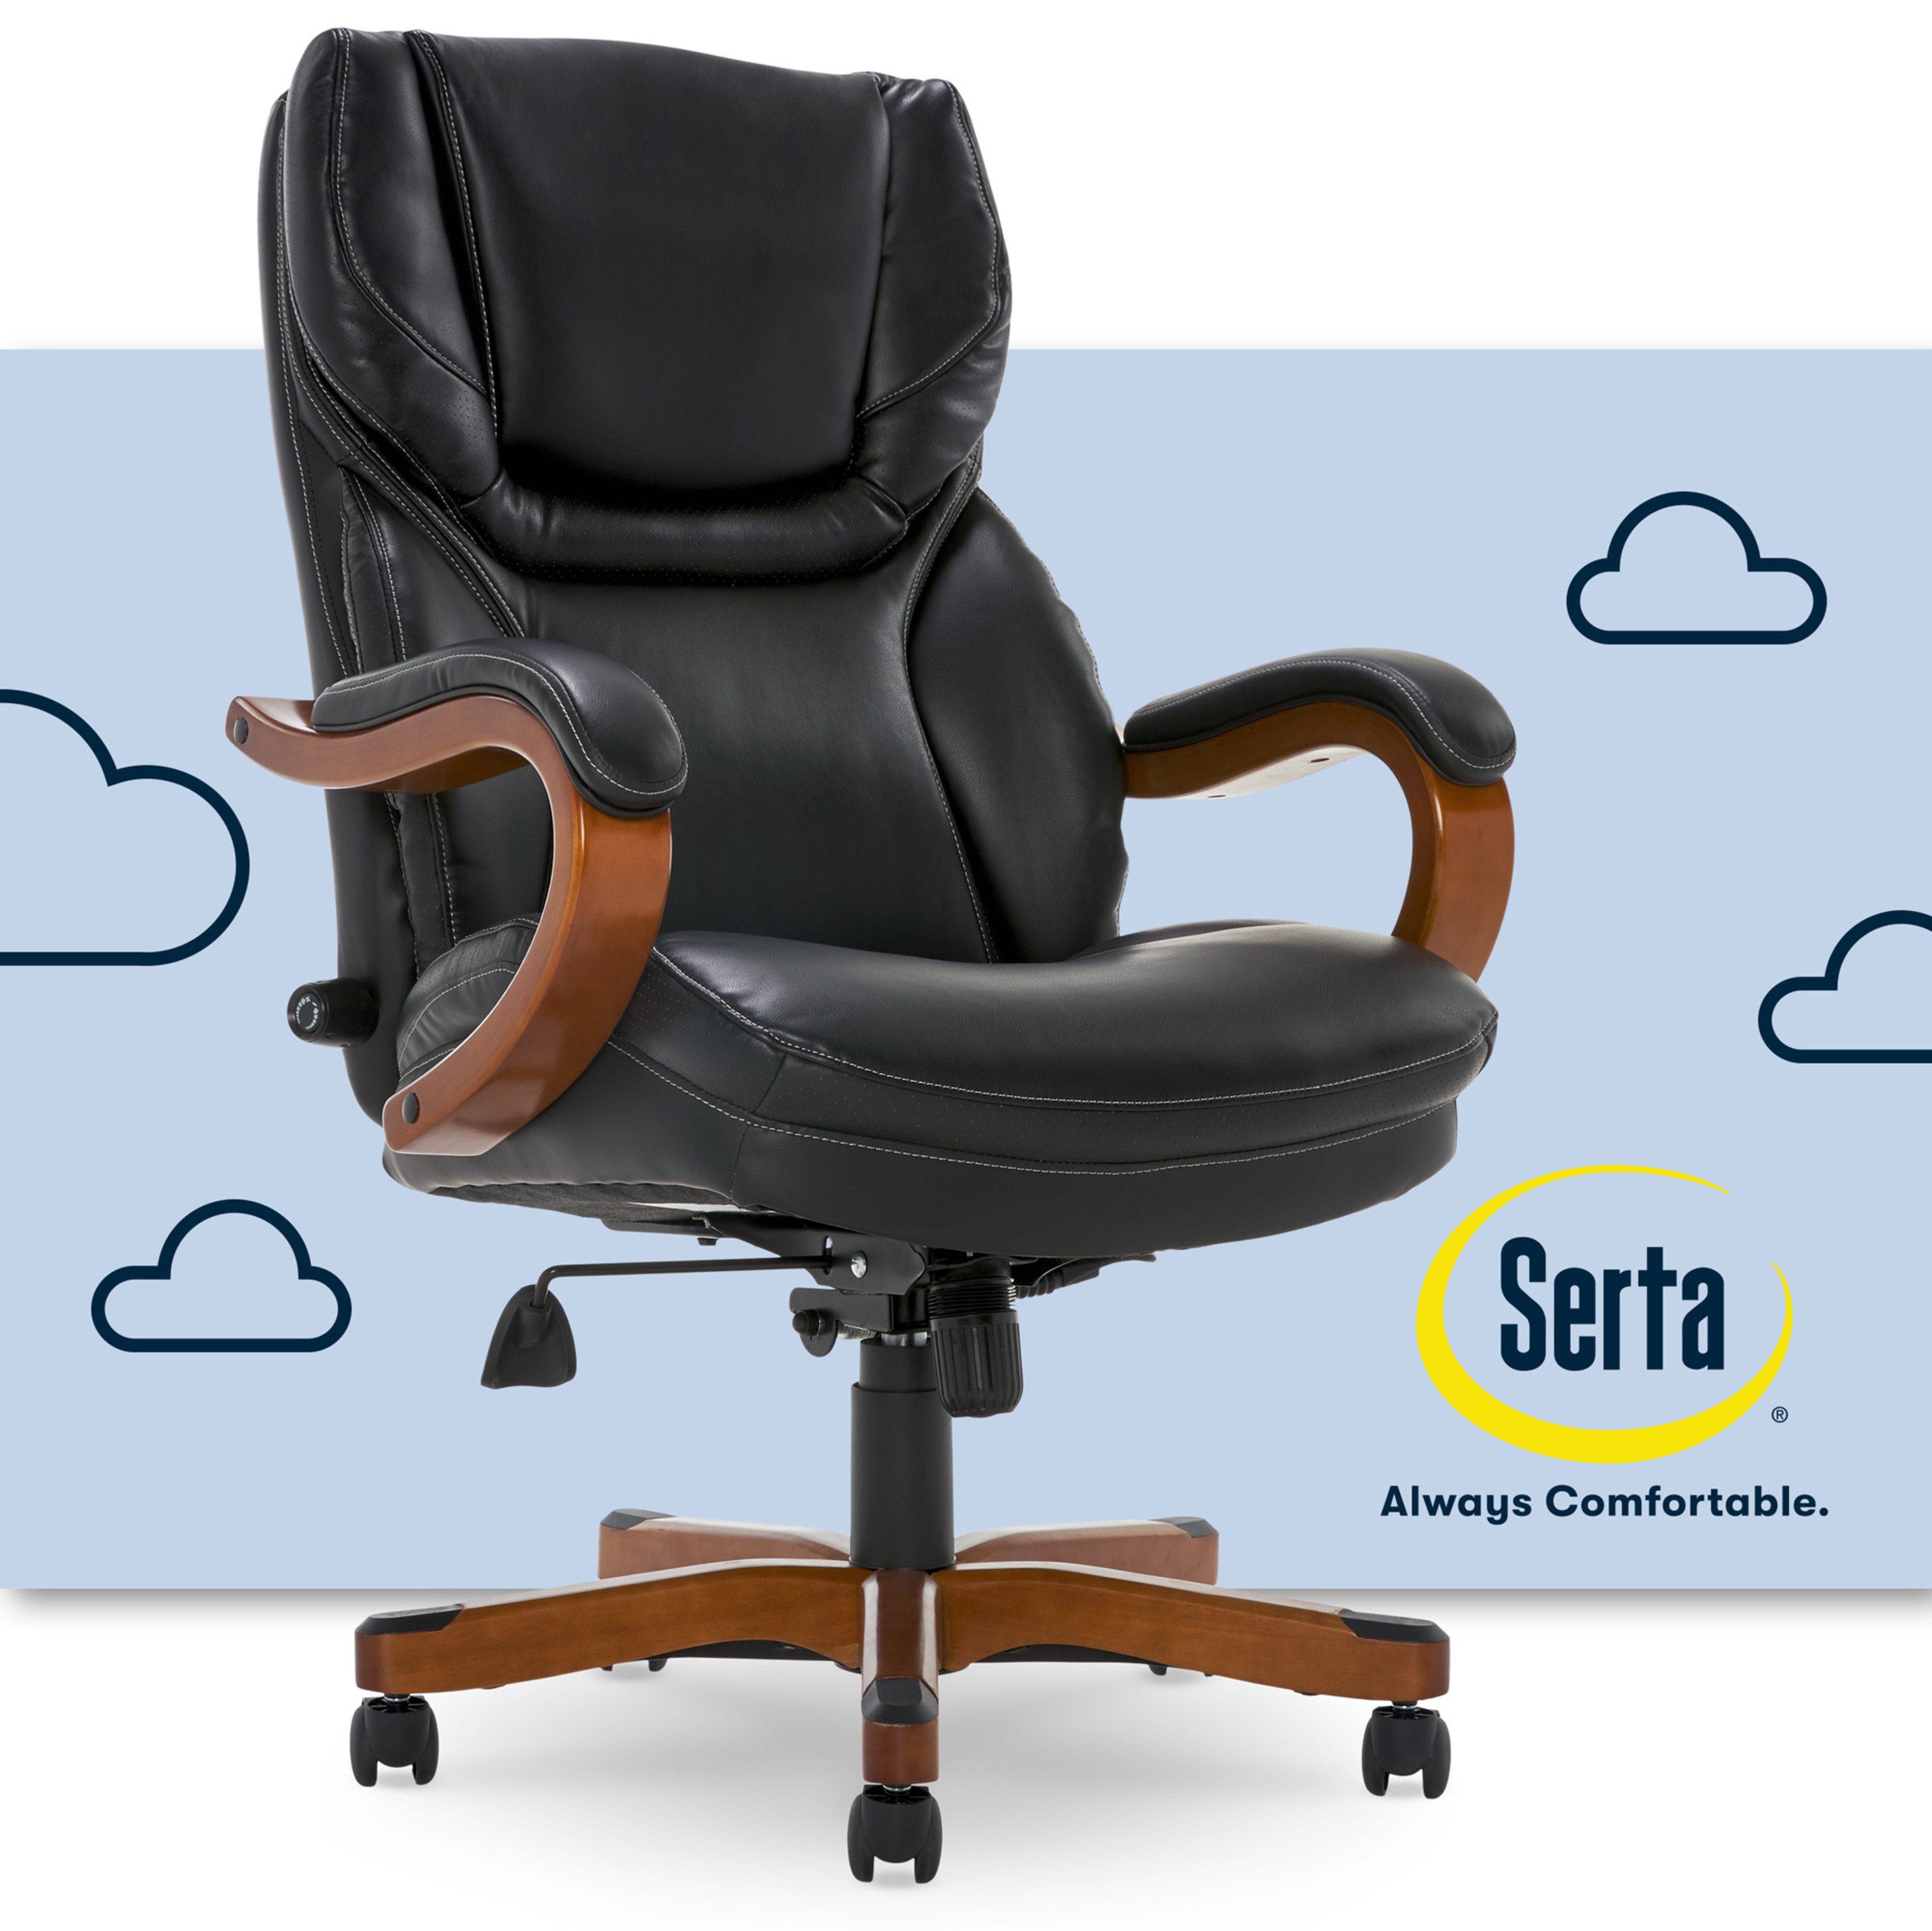 Serta Executive High Back Office Chair with Lumbar Support